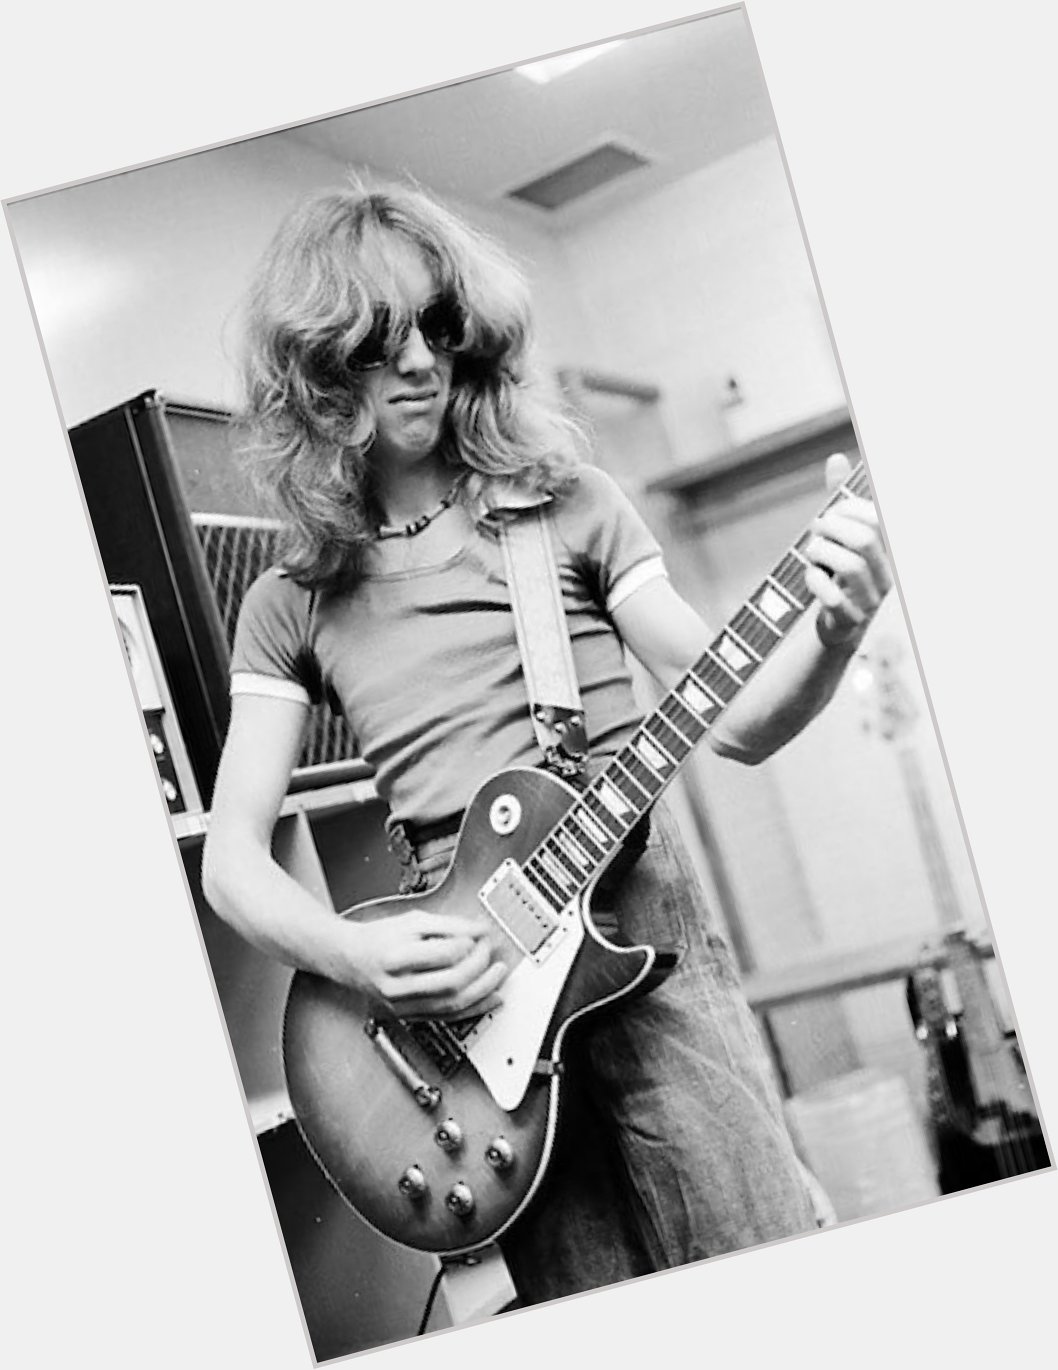 Happy 71st birthday to Aerosmith guitarist Brad Whitford, who was born on this day in 1952.  